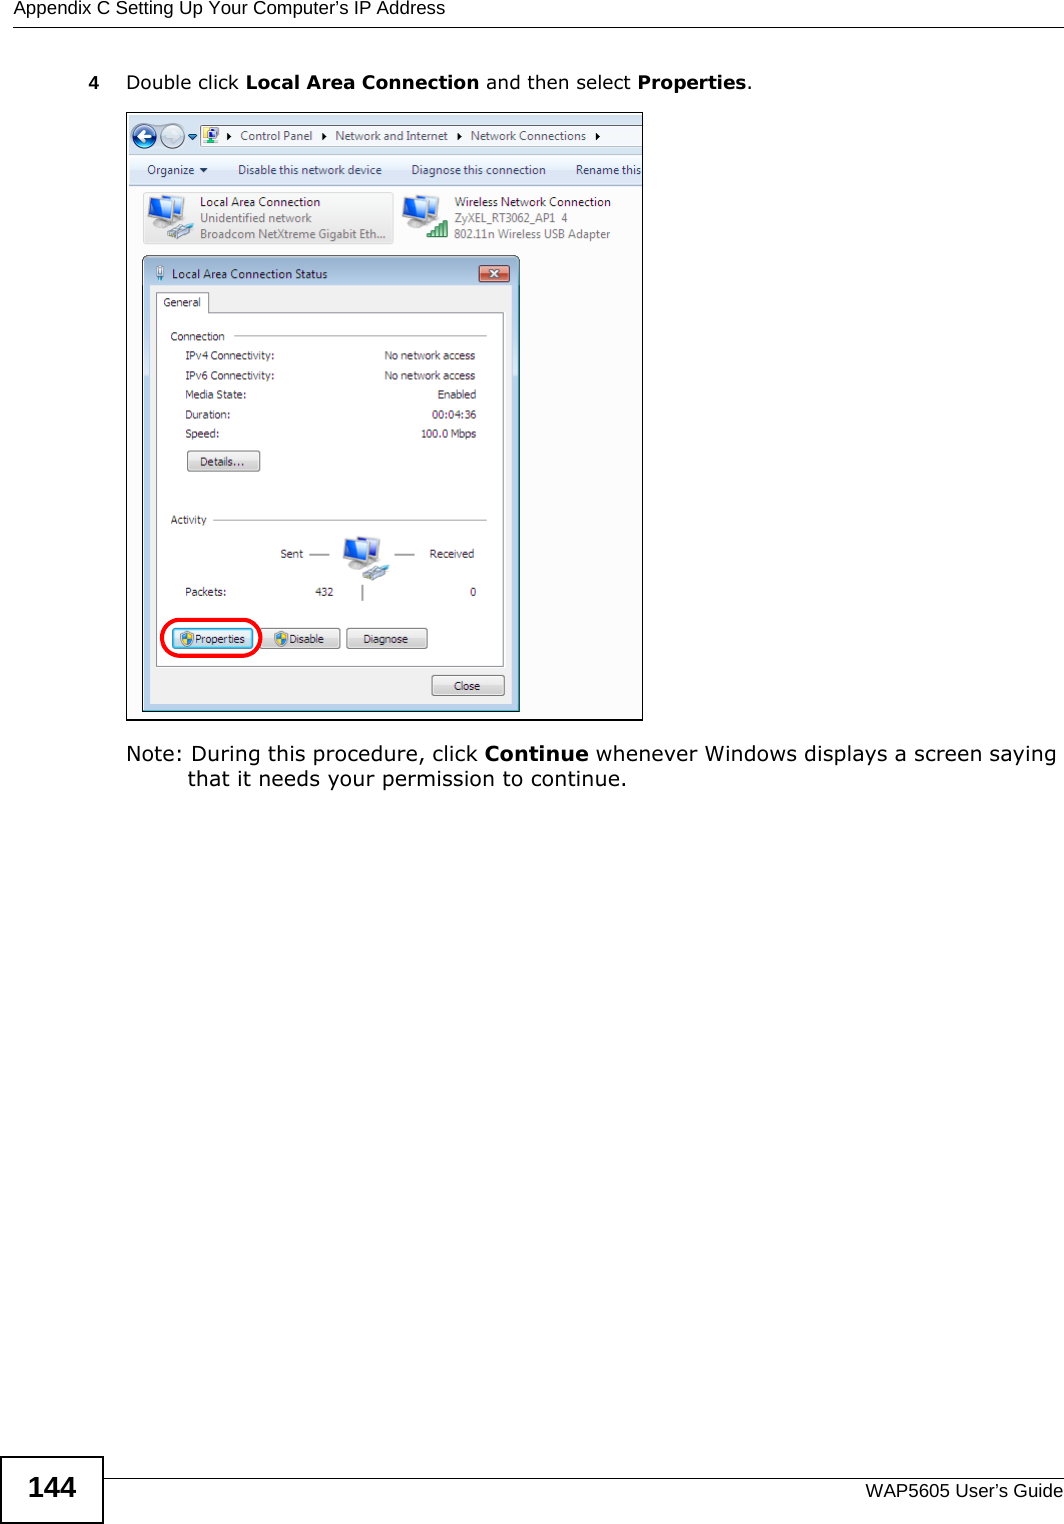 Appendix C Setting Up Your Computer’s IP AddressWAP5605 User’s Guide1444Double click Local Area Connection and then select Properties.Note: During this procedure, click Continue whenever Windows displays a screen saying that it needs your permission to continue.